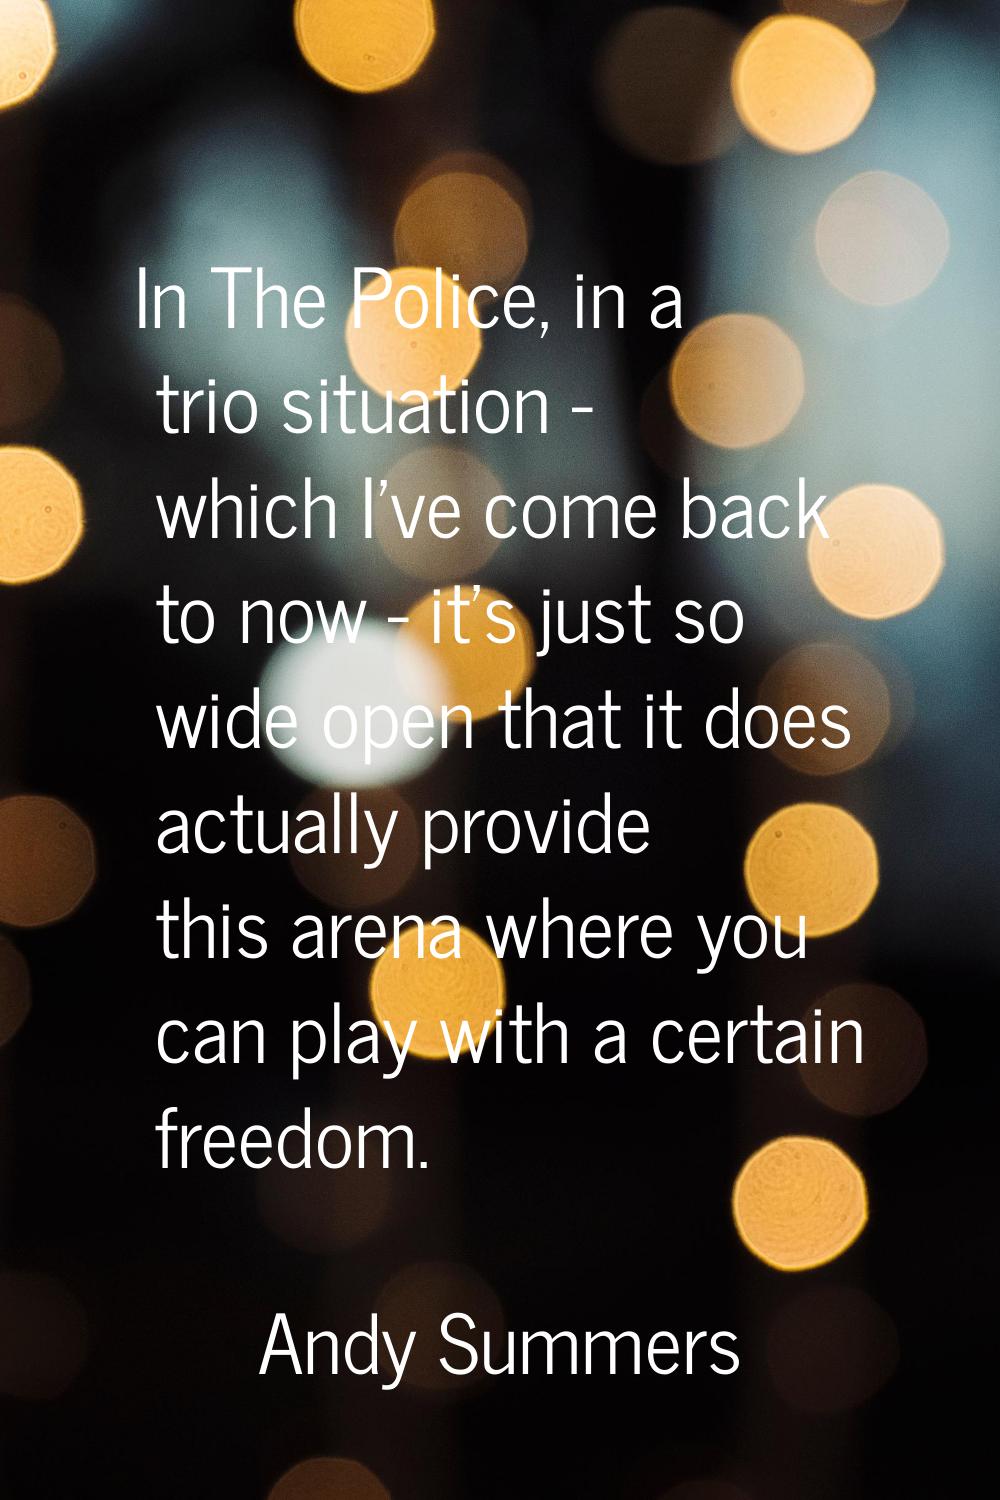 In The Police, in a trio situation - which I've come back to now - it's just so wide open that it d